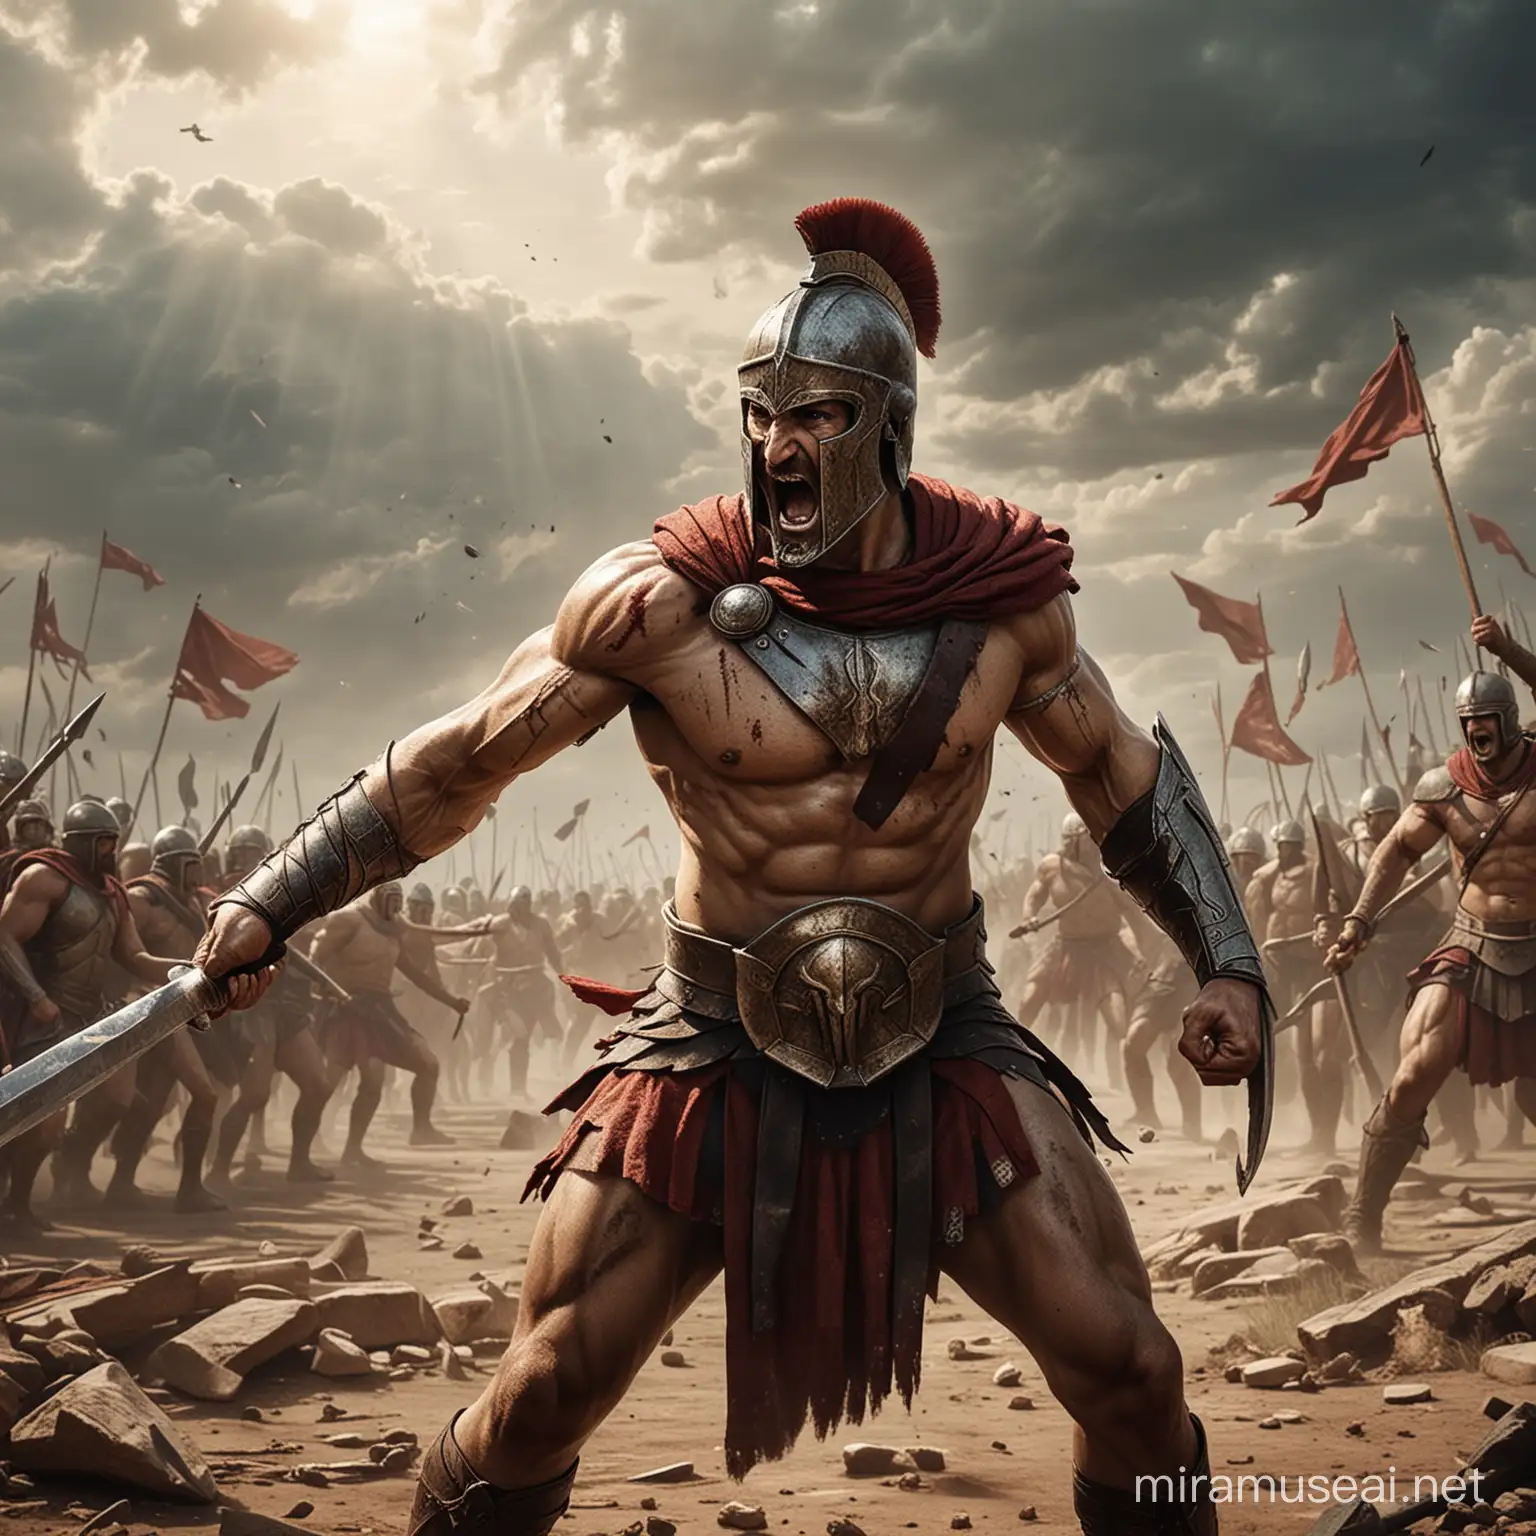 Draw a scene from a battle where a victorious Spartan expresses his will to win even in defeat. Show him in a fighting pose with a look of intensity on his face, with signs of struggle on his body and expressive gestures that convey his willpower.